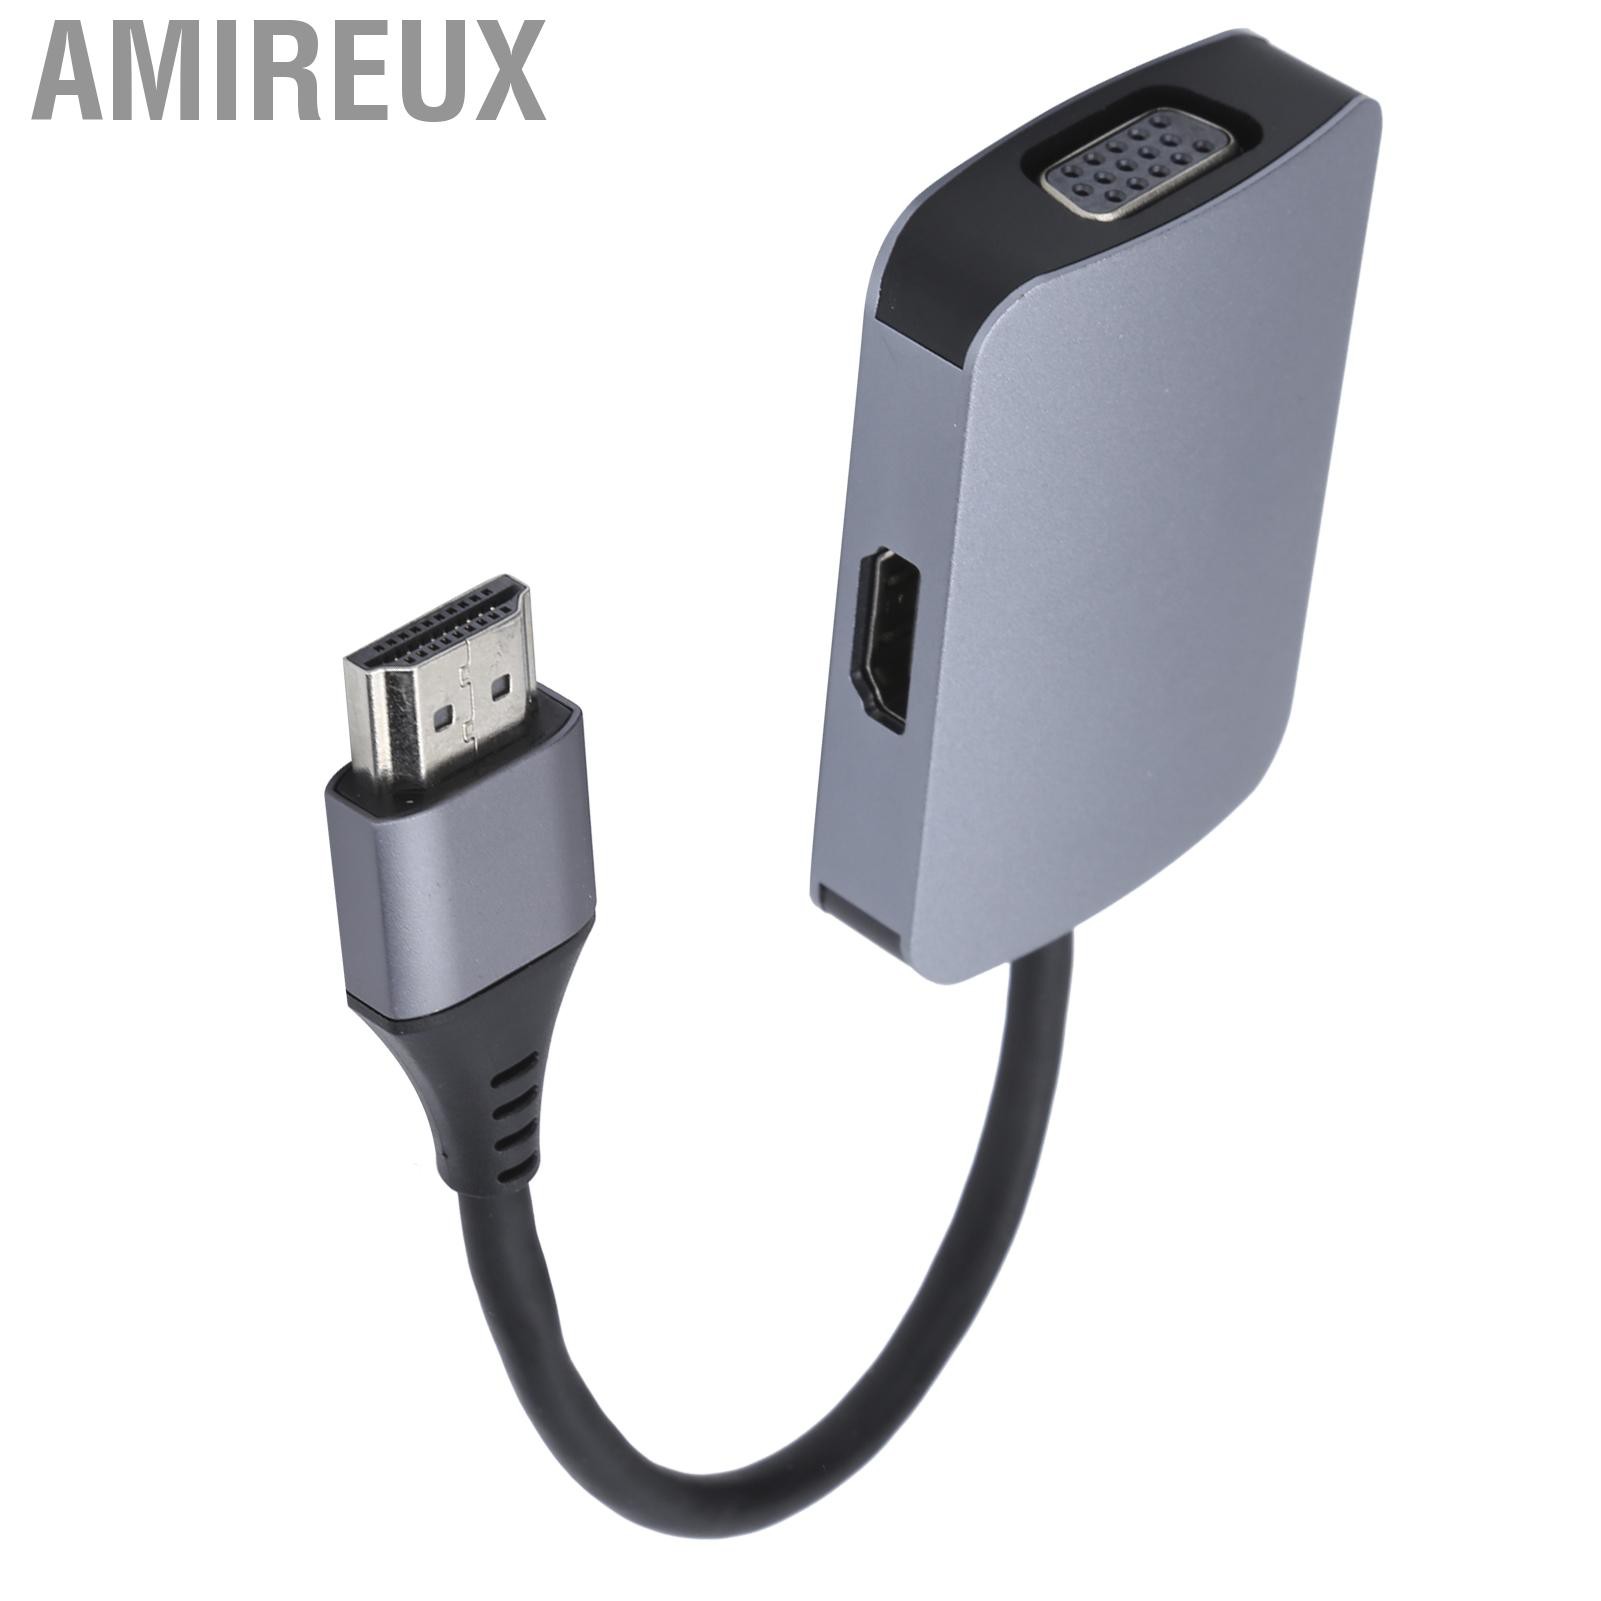 Amireux Portable 4 In 1 HDMI Converter to HDMI+VGA+Micro USB+3.5mm Audio Adapter Docking Station